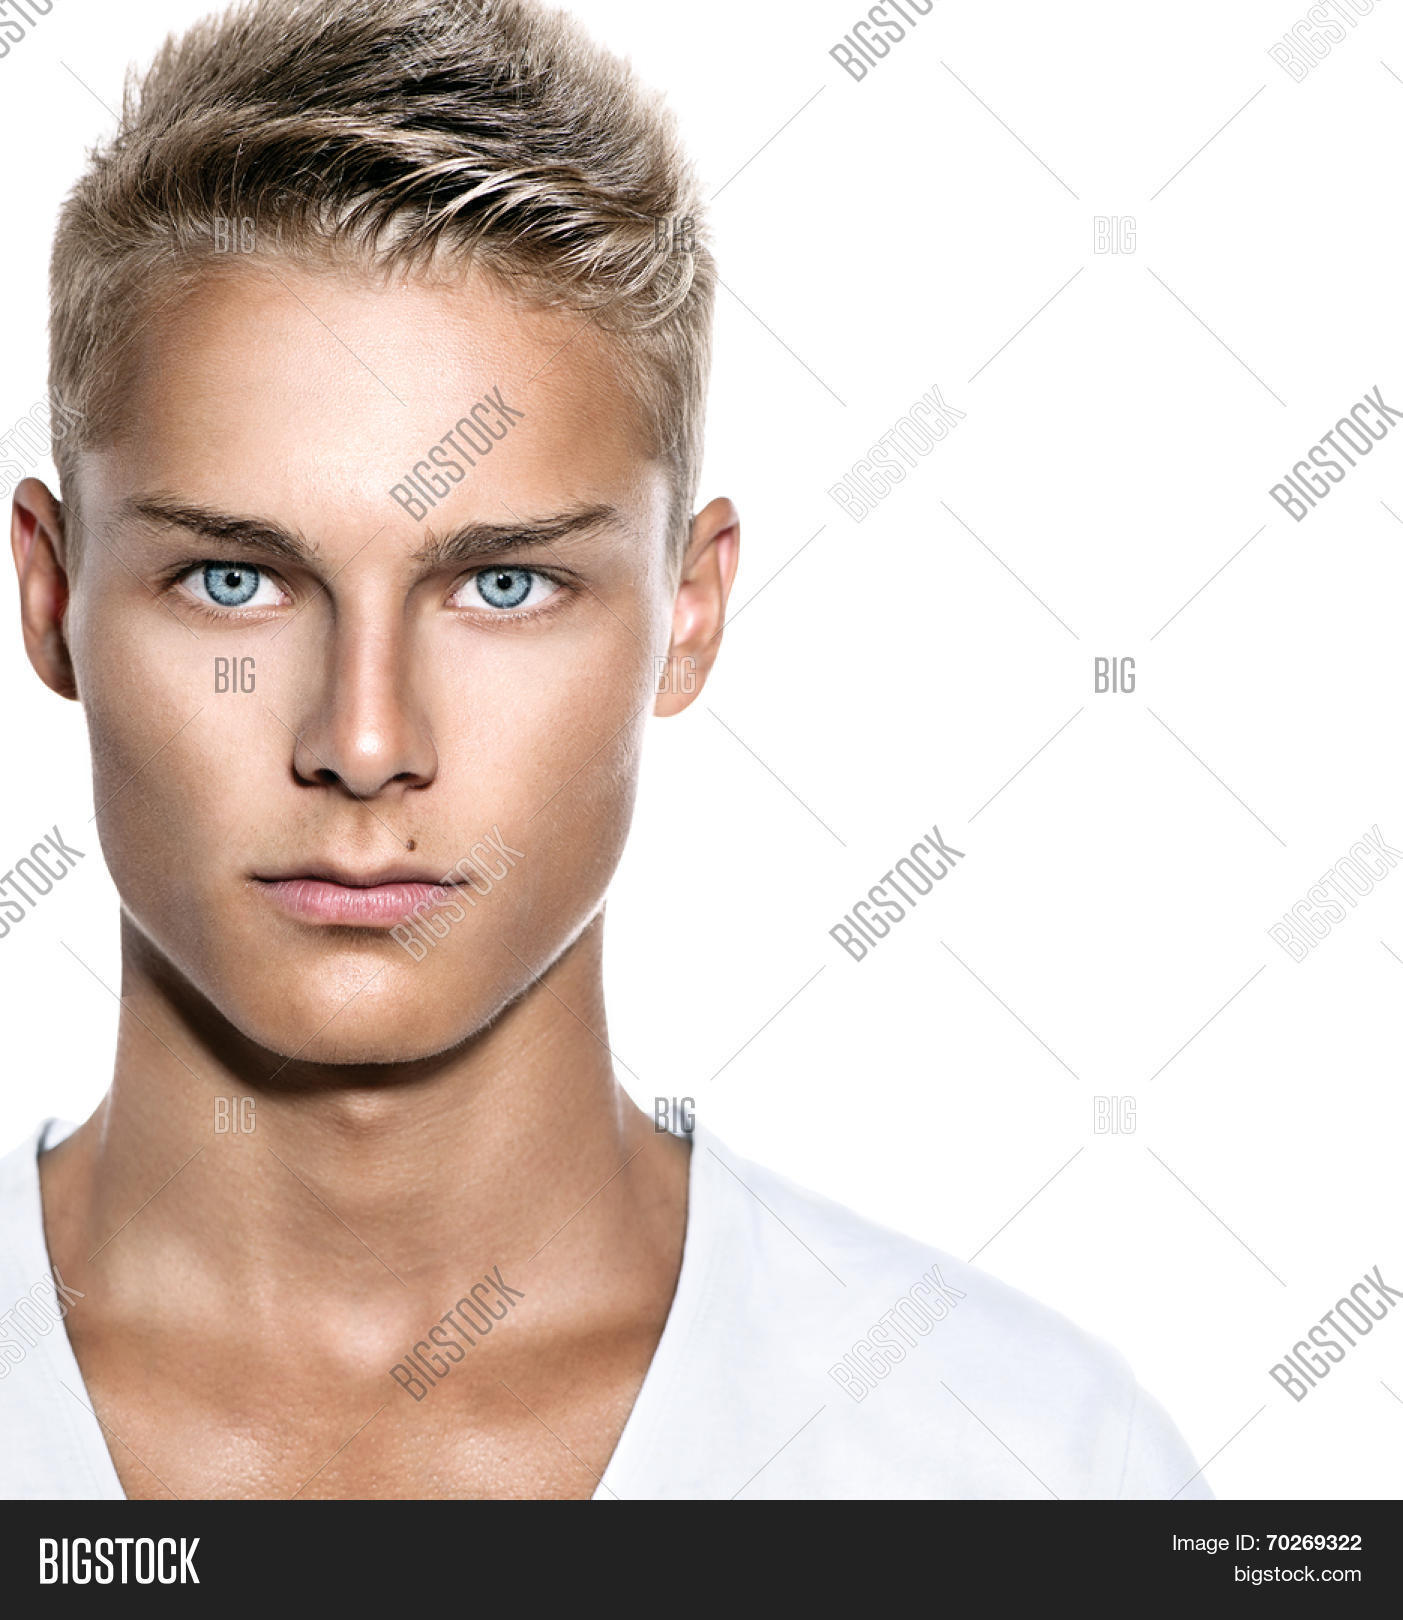 Handsome Young Man's Face. Portrait Image & Photo | Bigstock